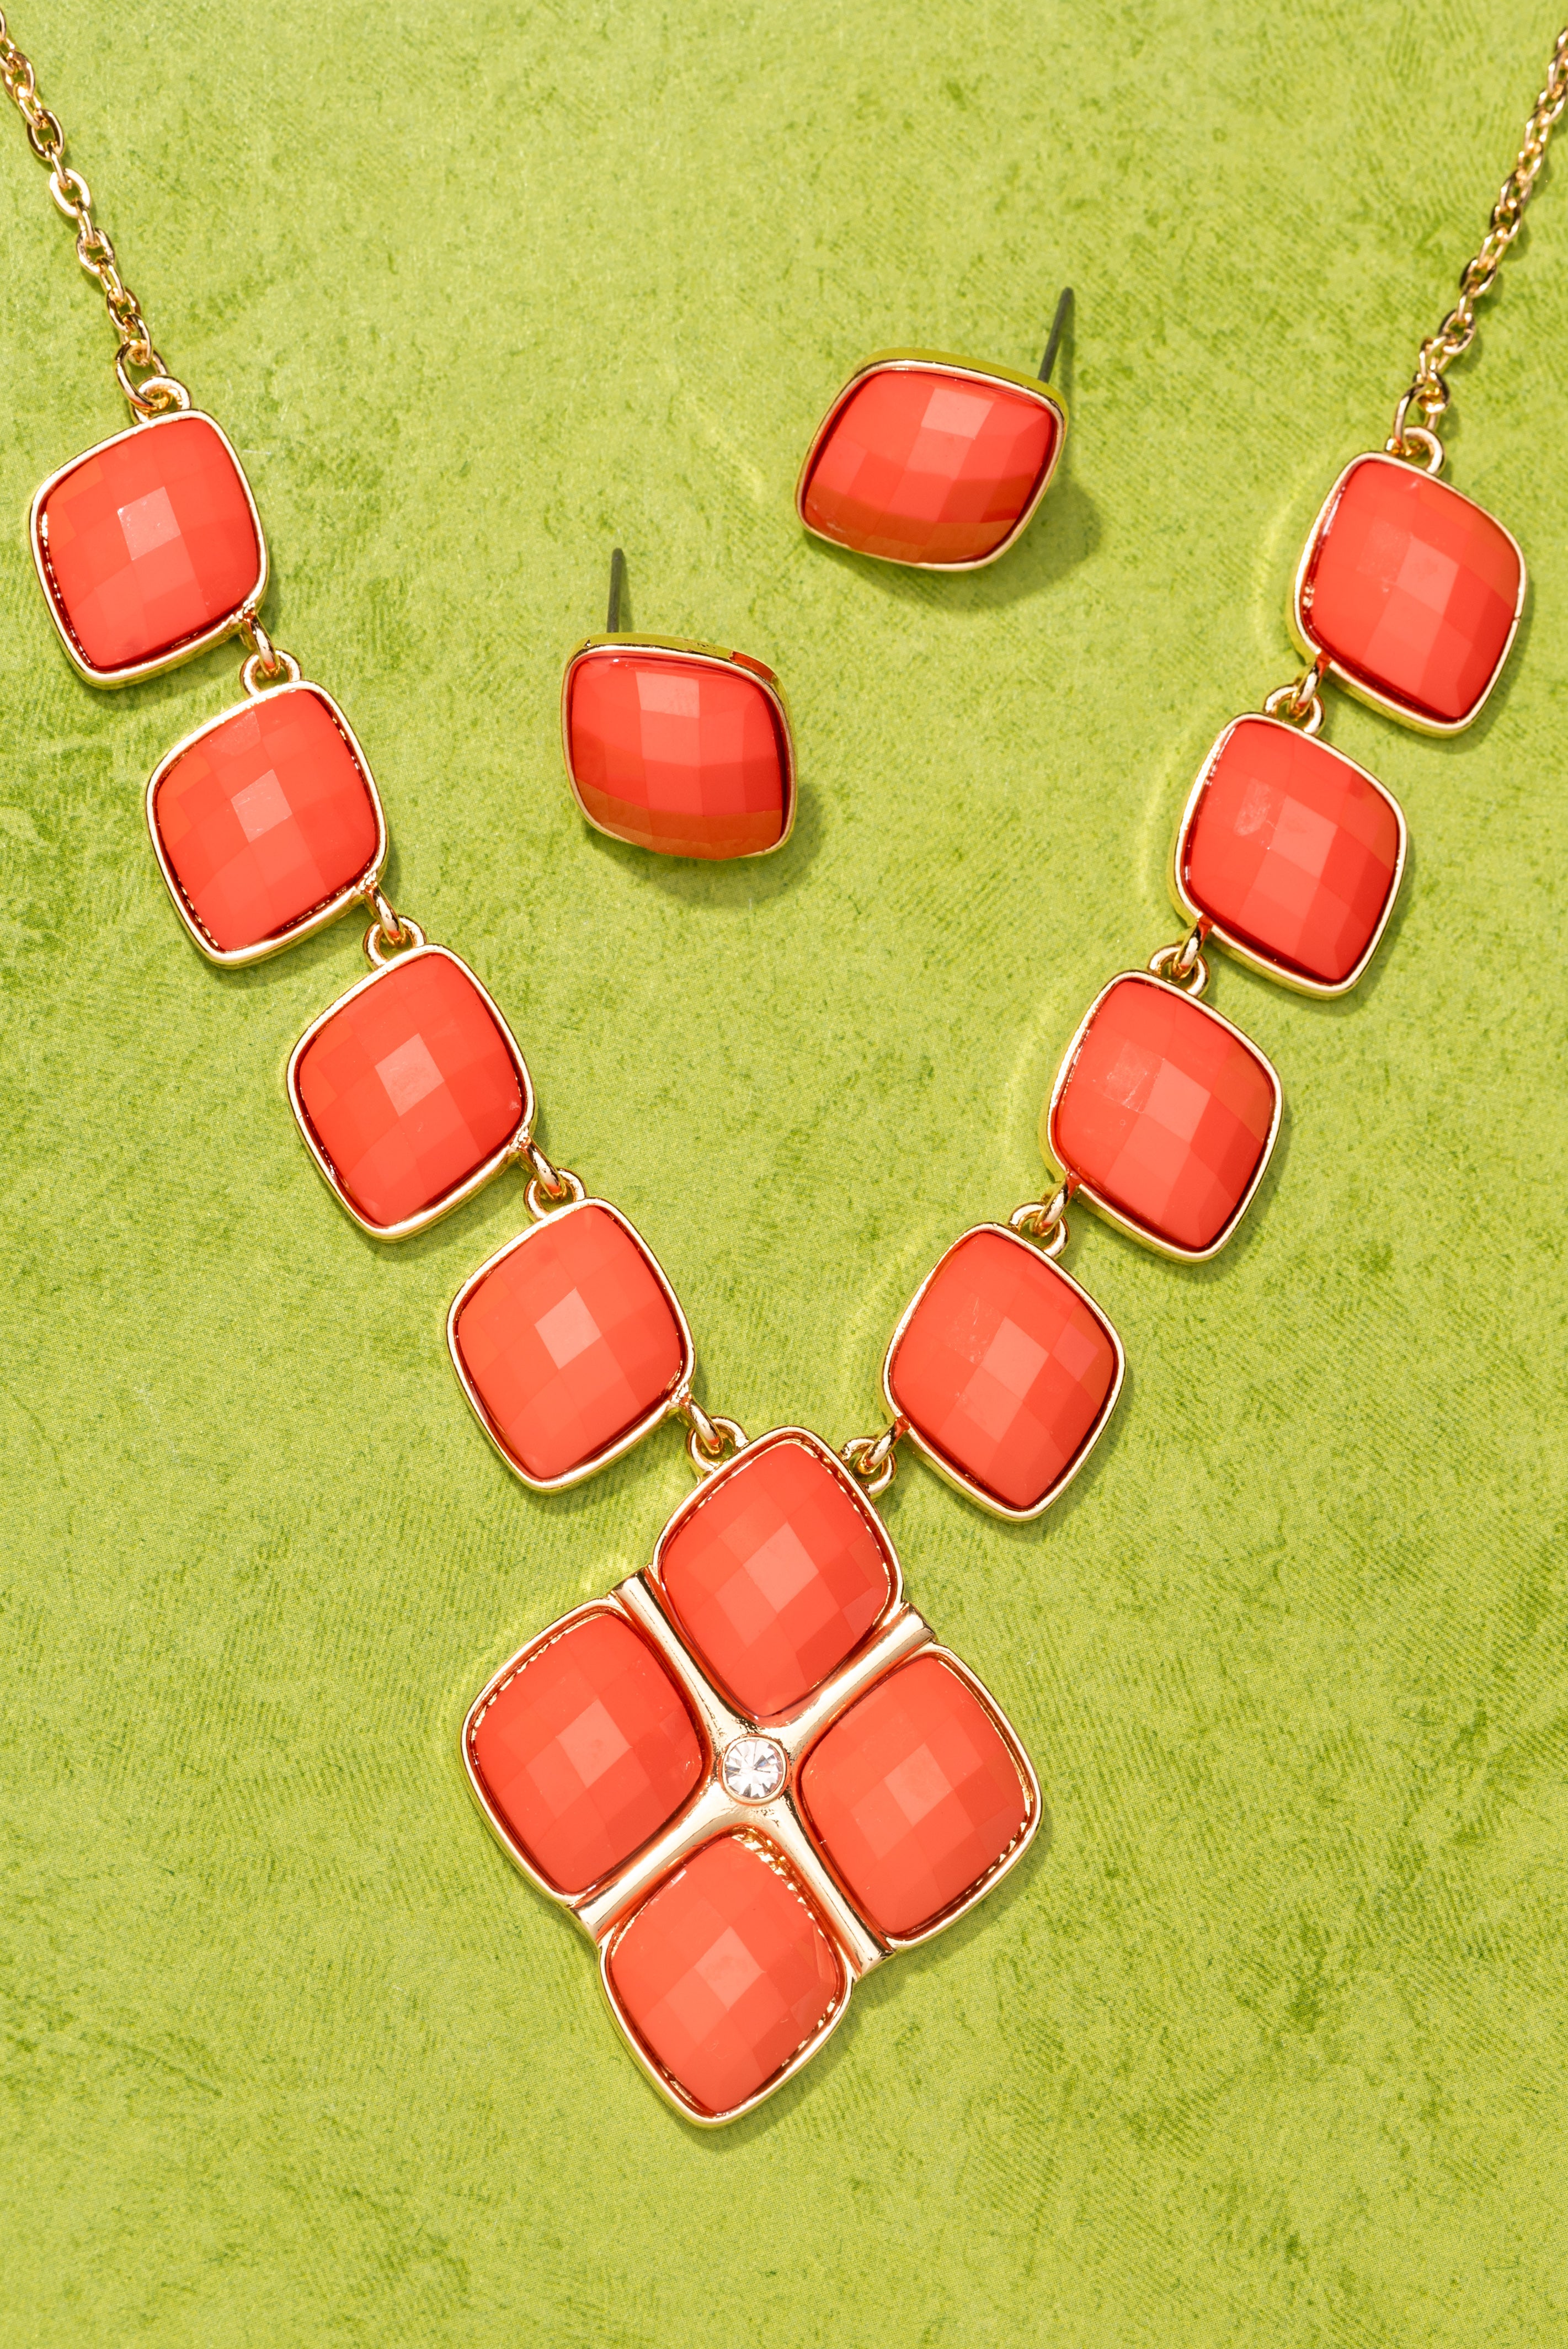 Type 3 Diamond Coral Necklace/Earring Set